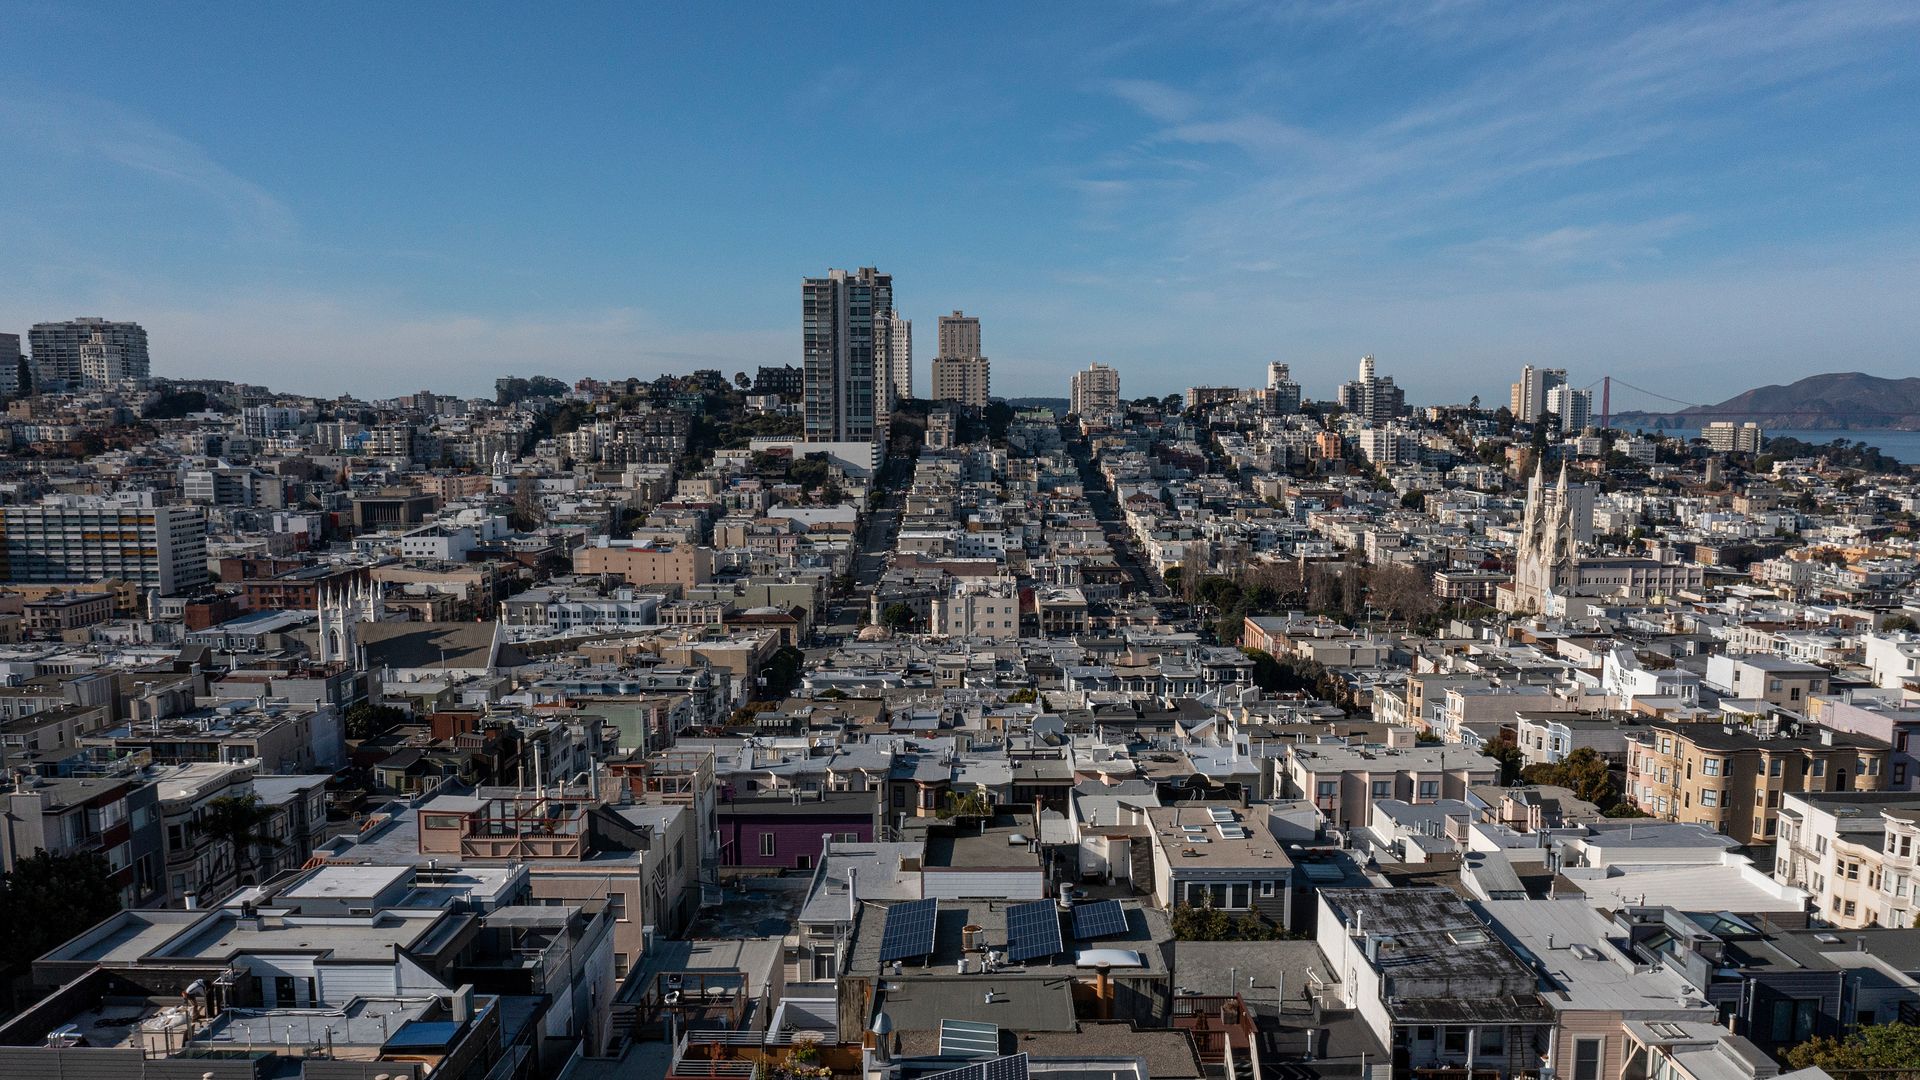 A photo showing an eagle-eyed view of San Francisco 